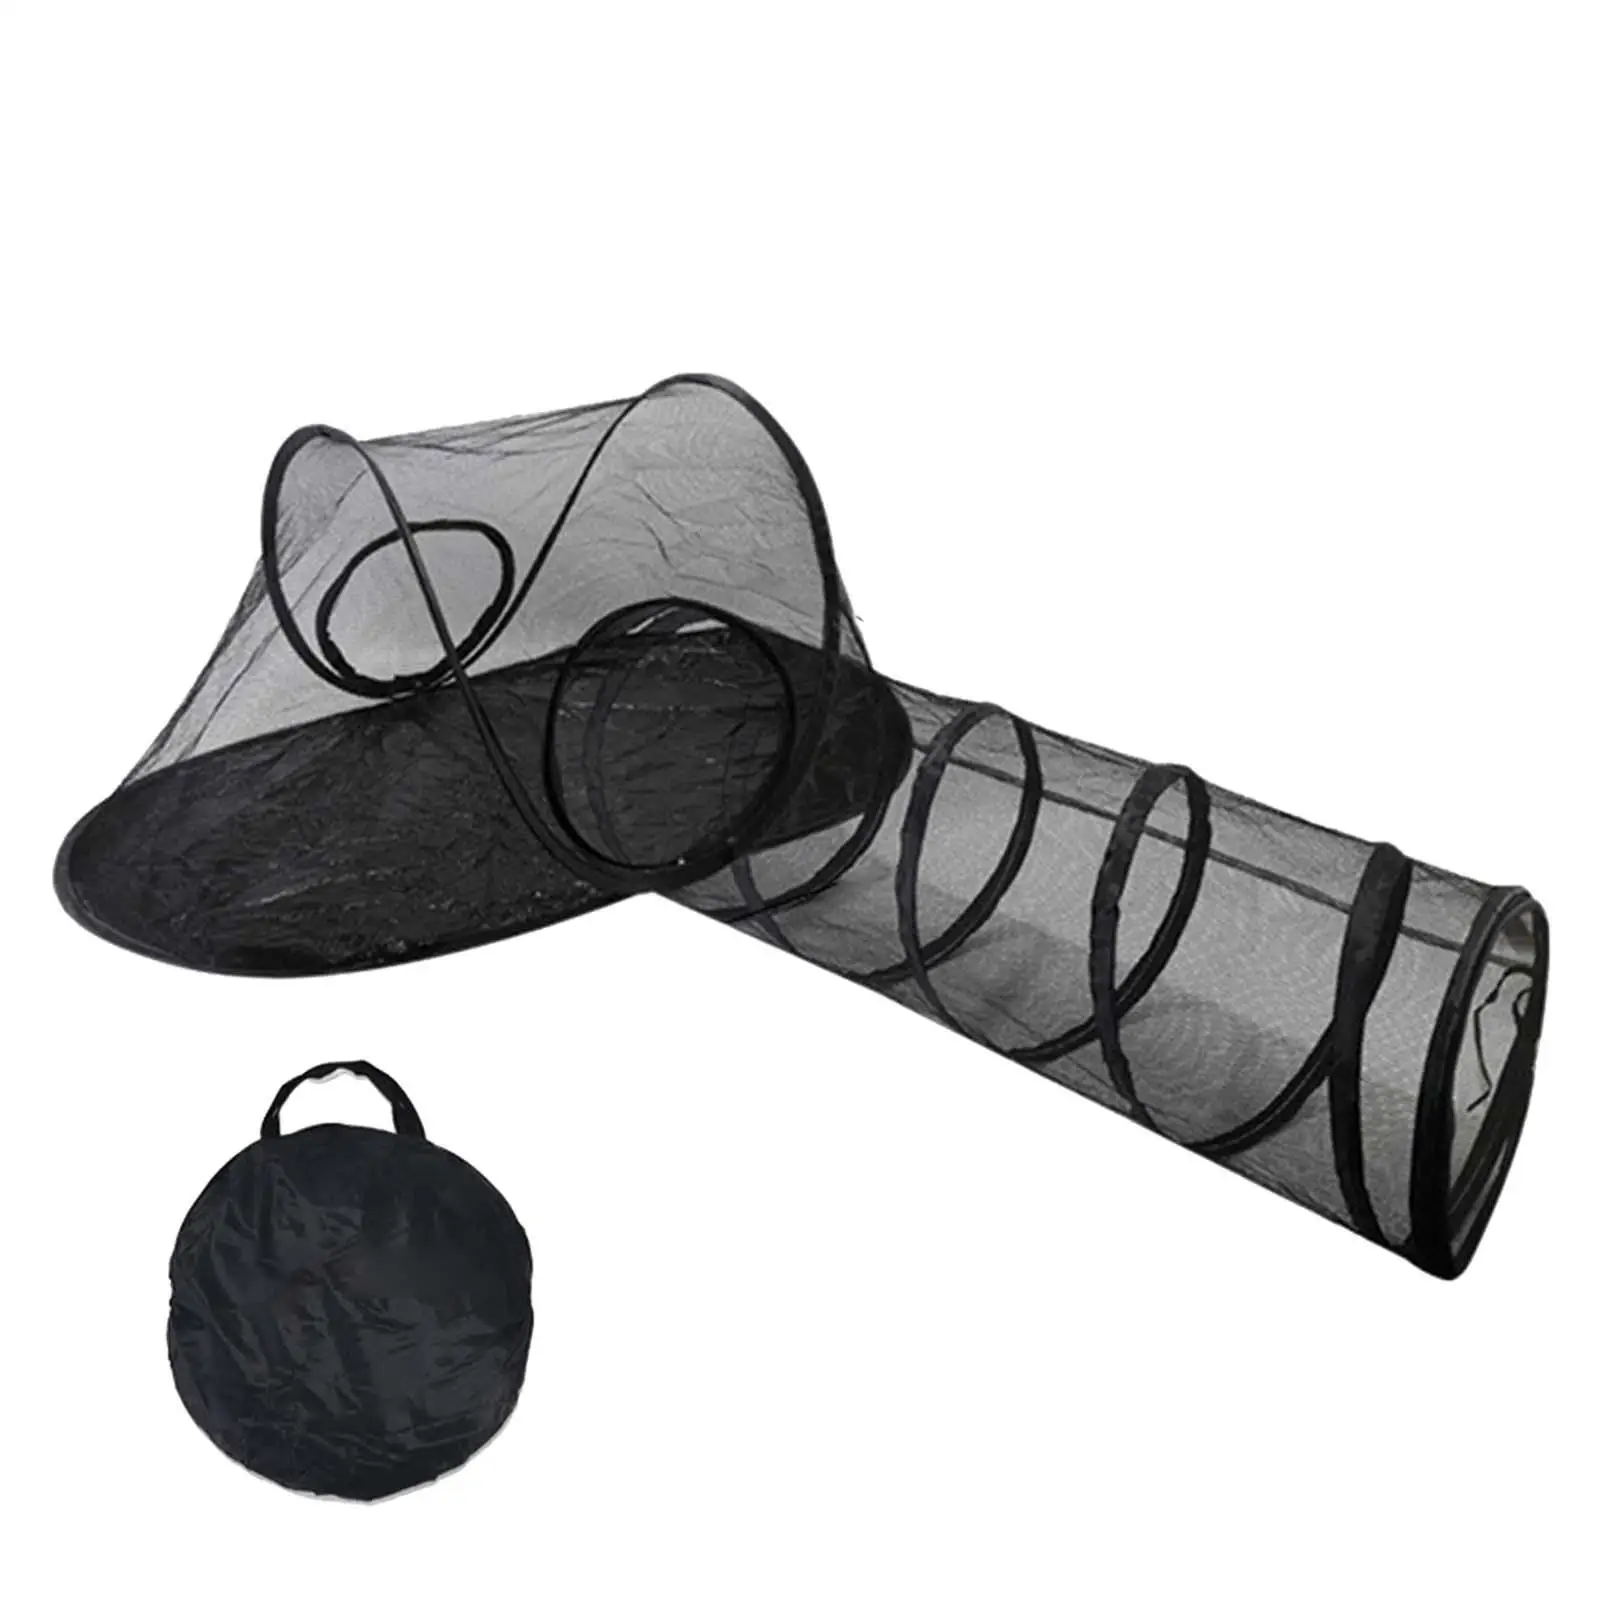 Cat Tent and Tunnel Outdoor Foldable Exercise Tent Puppy Playhouse Zipper Entrance for Puppy Small Dog Small Animals Kitten Cats